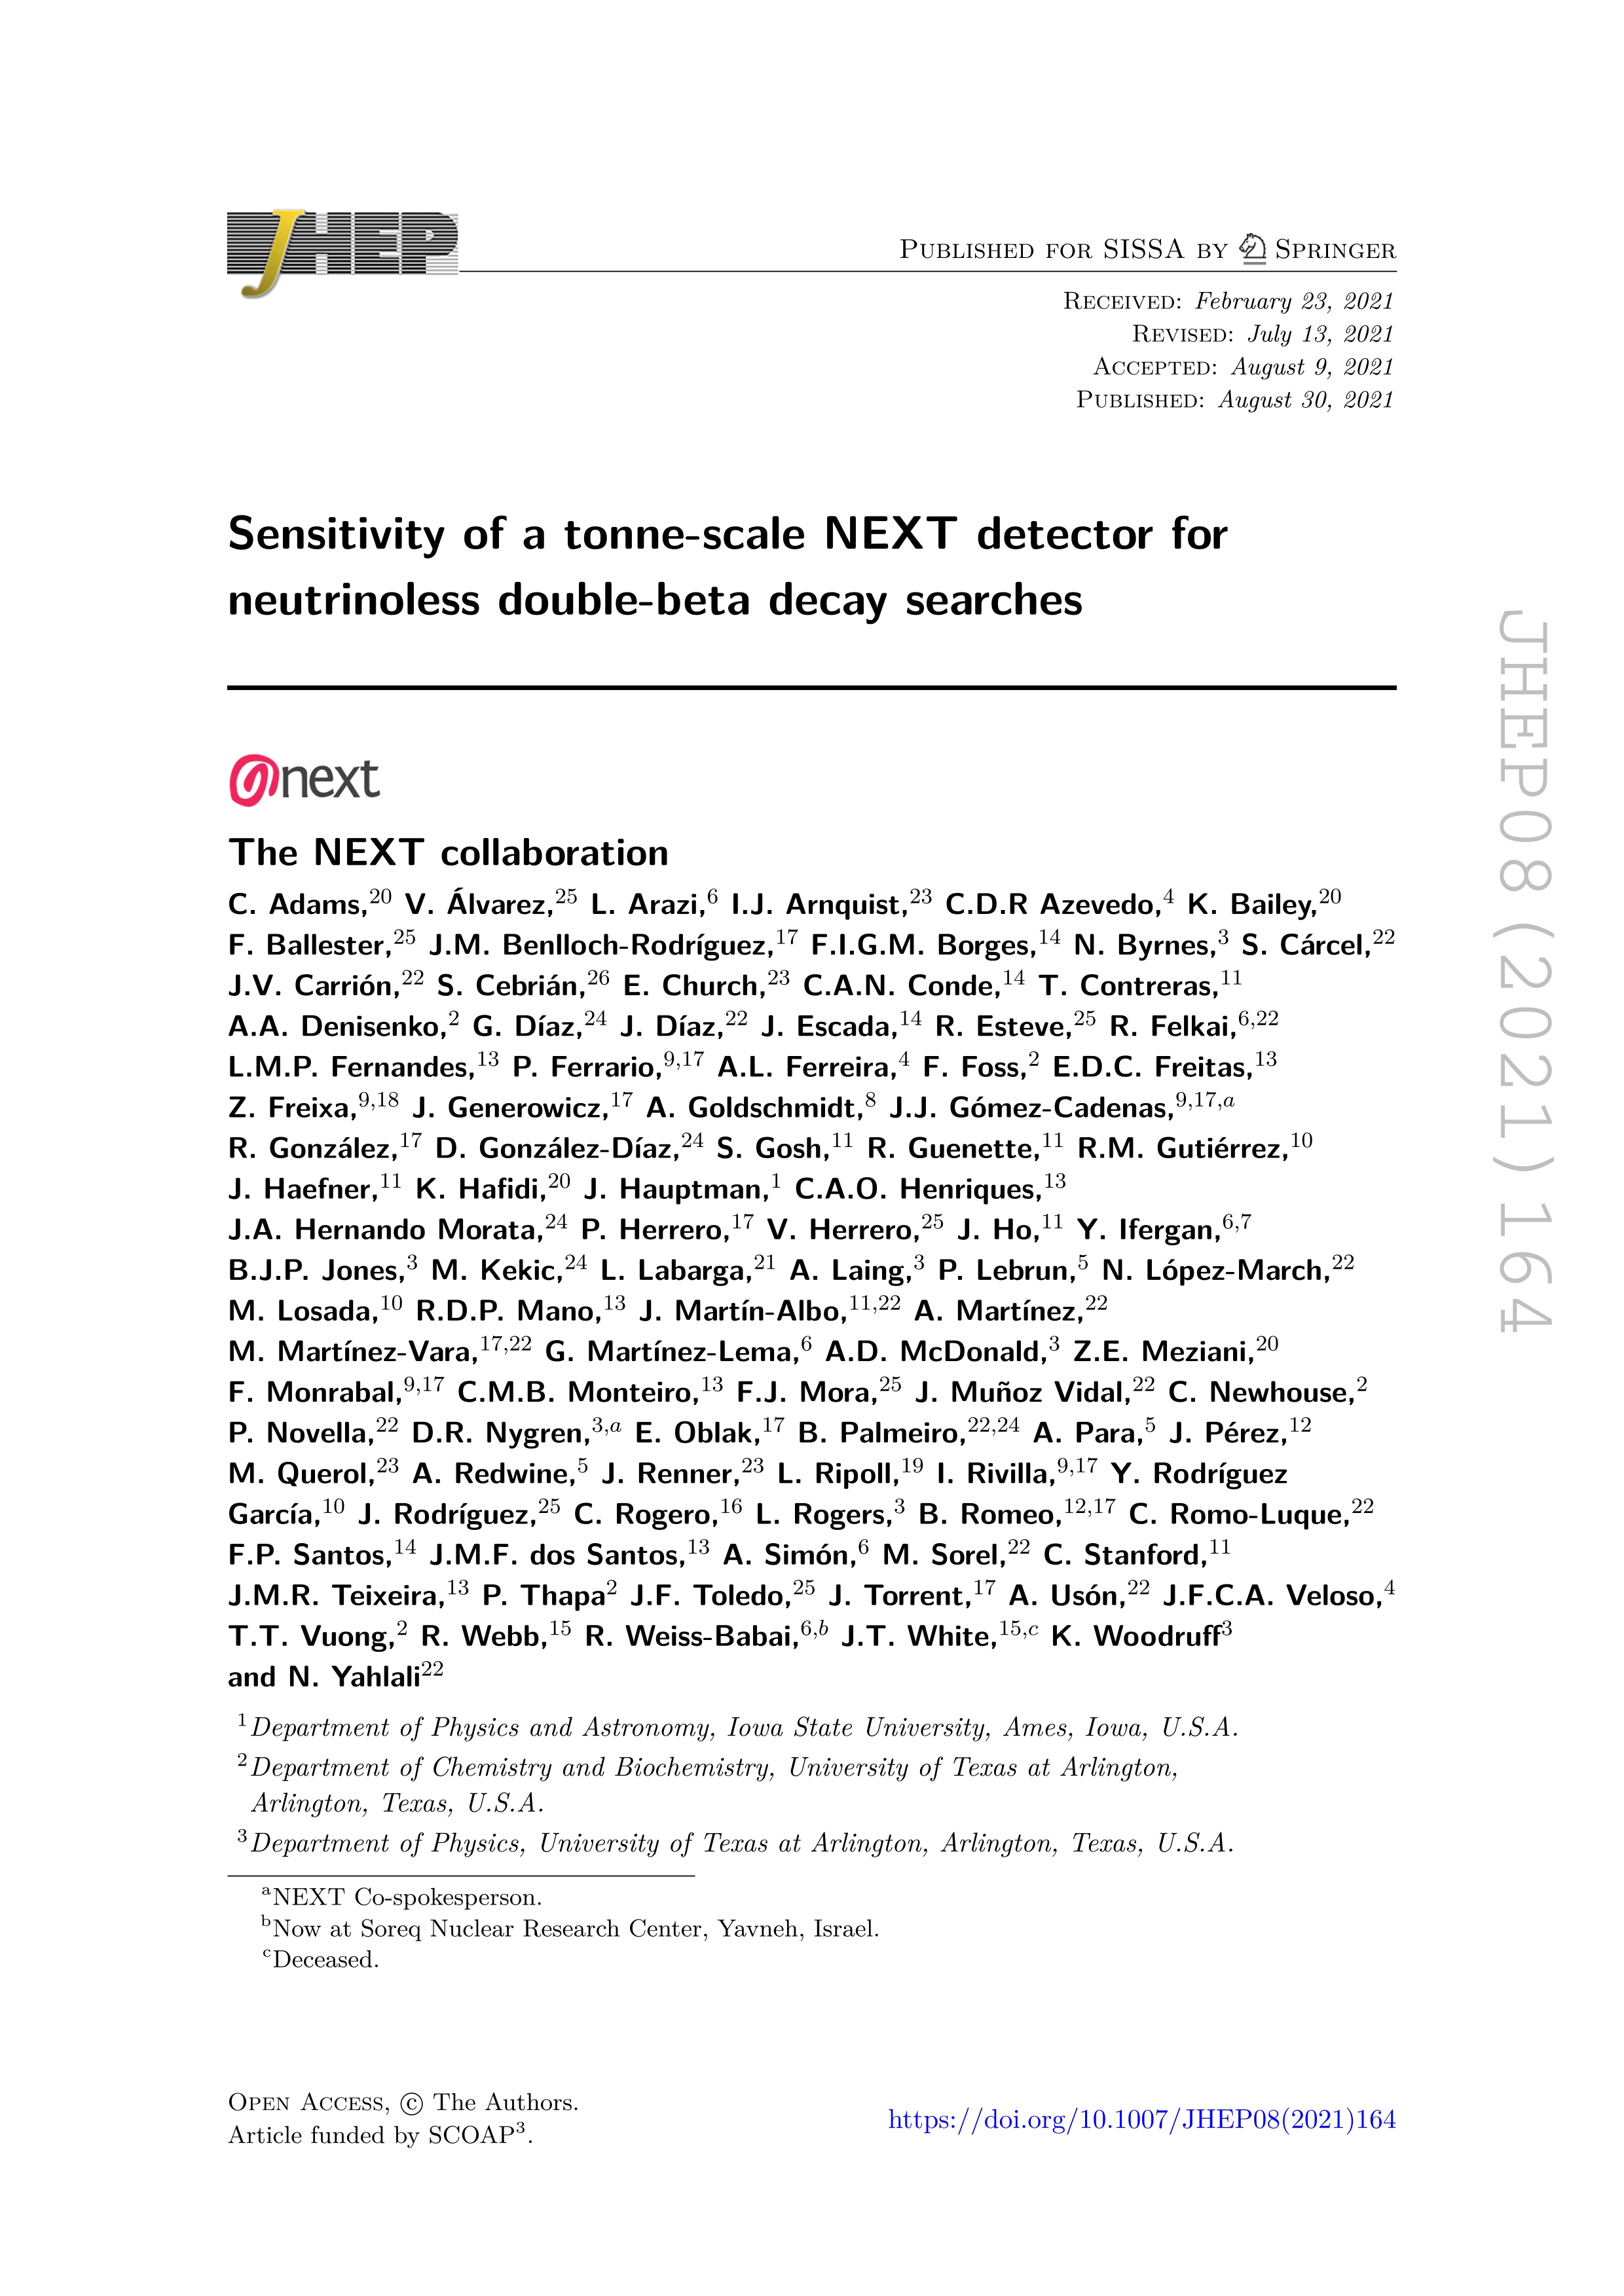 Sensitivity of a tonne-scale NEXT detector for neutrinoless double-beta decay searches